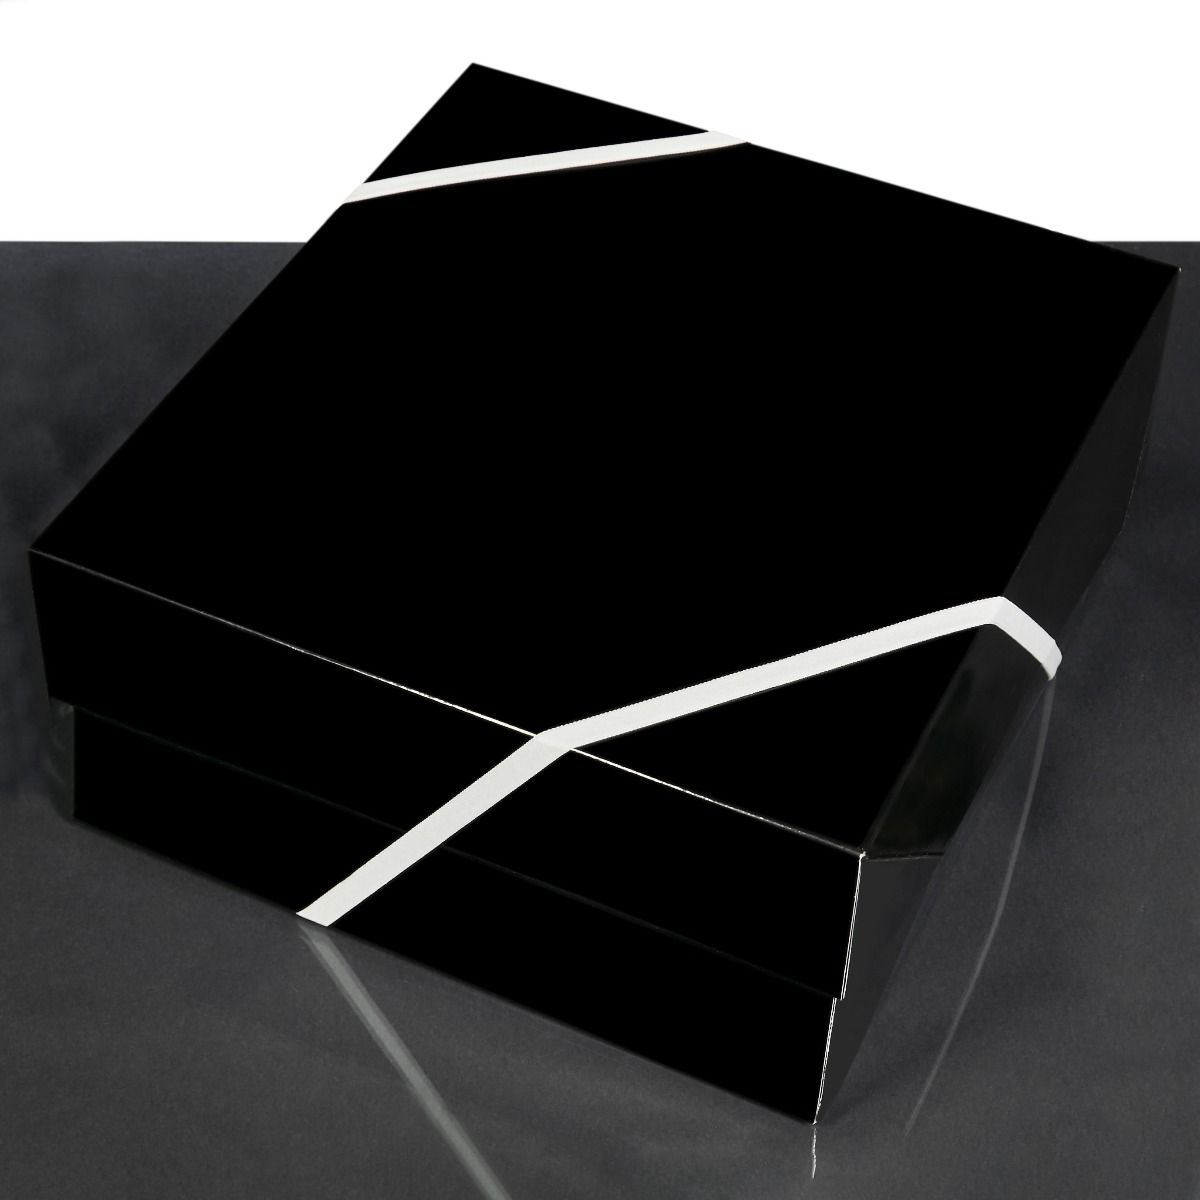 https://images.homewetbar.com/media/catalog/product/9/0/9091-black-large-square-glossy-gift-box-add-on.jpg?store=default&image-type=image